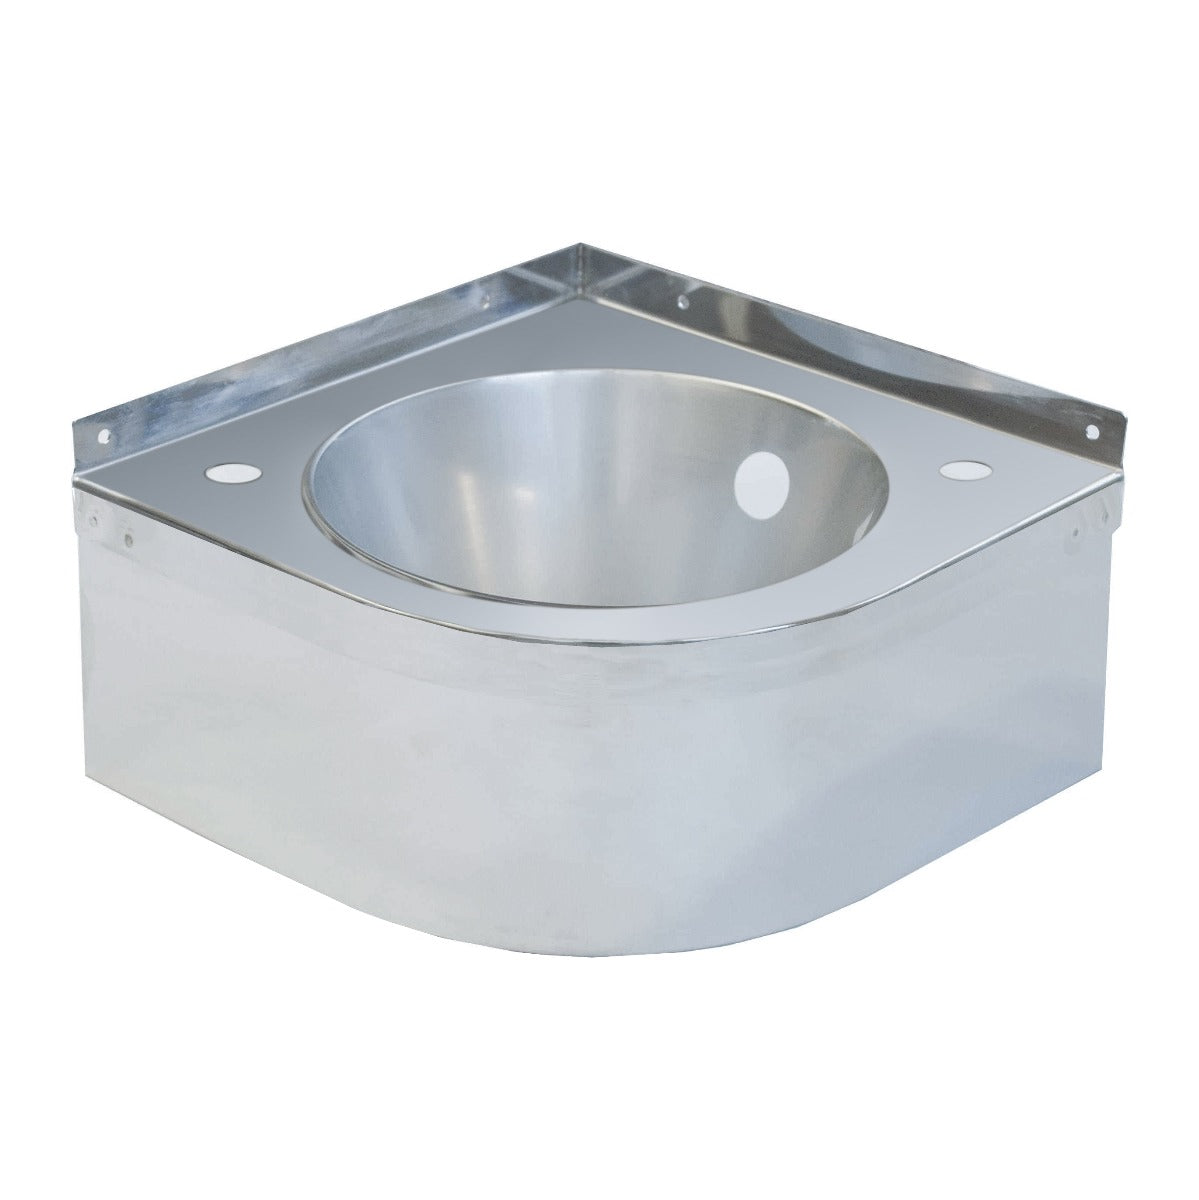 Stainless steel wall mounted corner basin